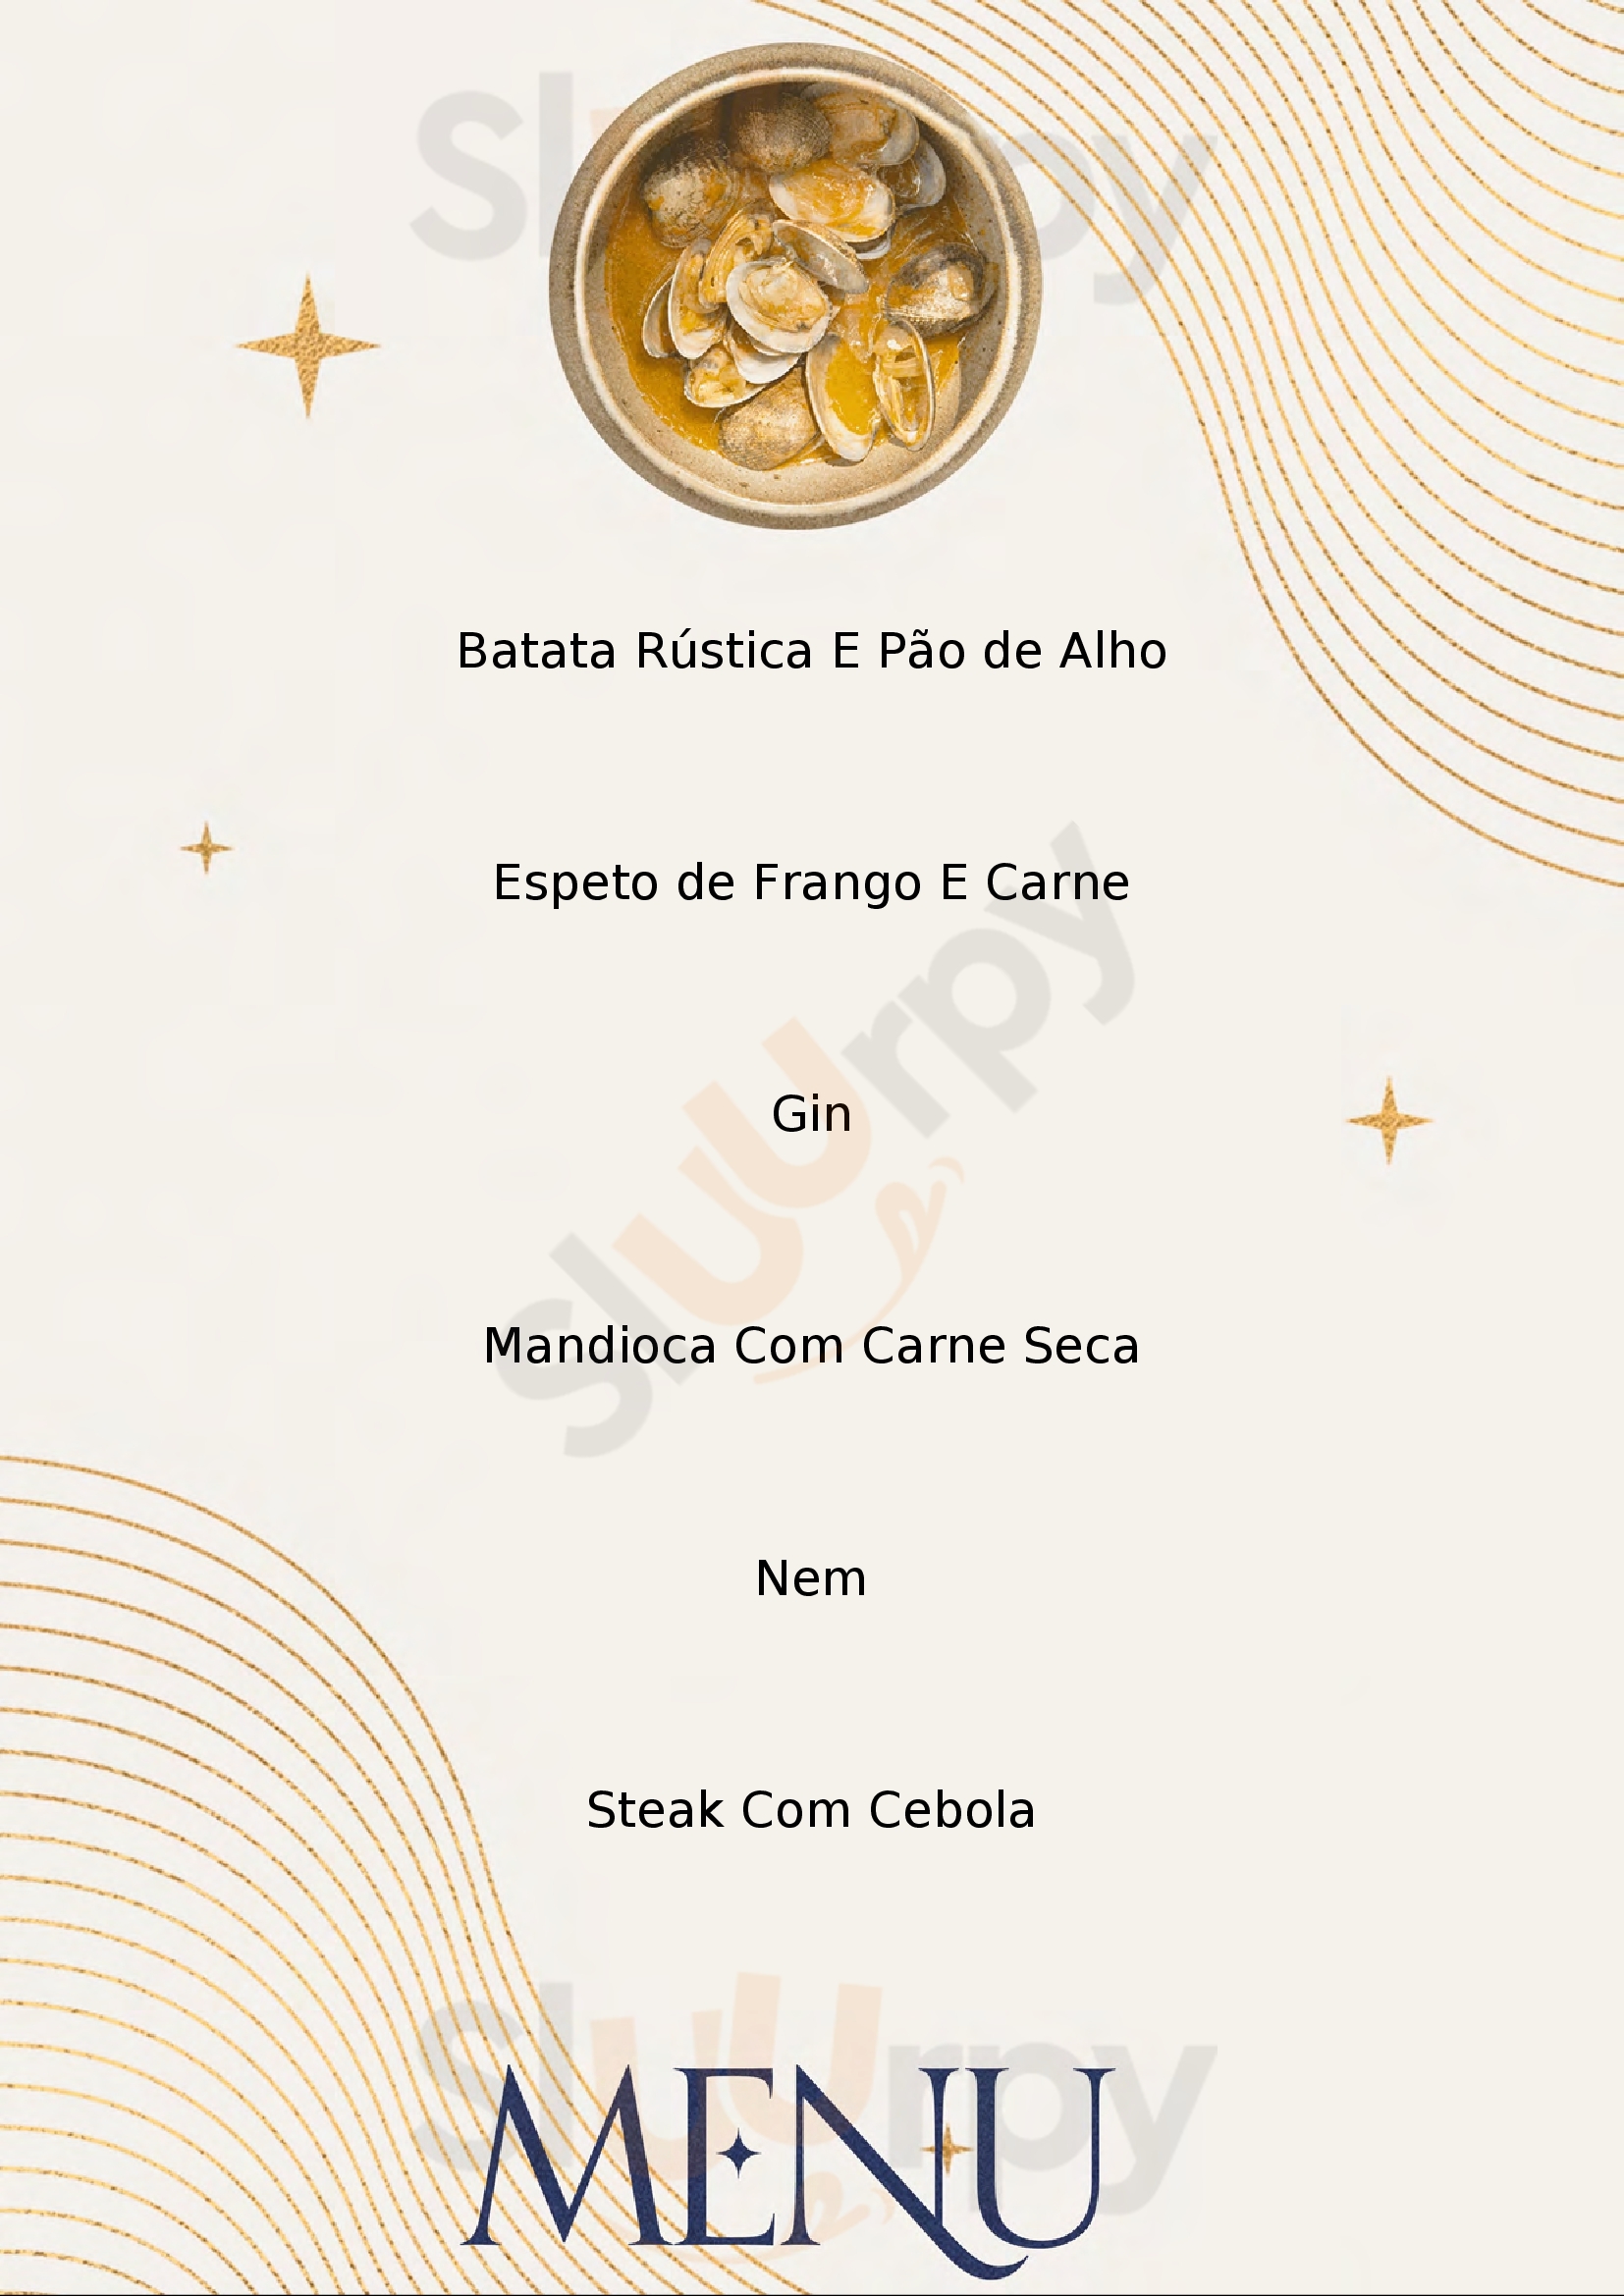 Meat Beer And Co Itaipava Menu - 1